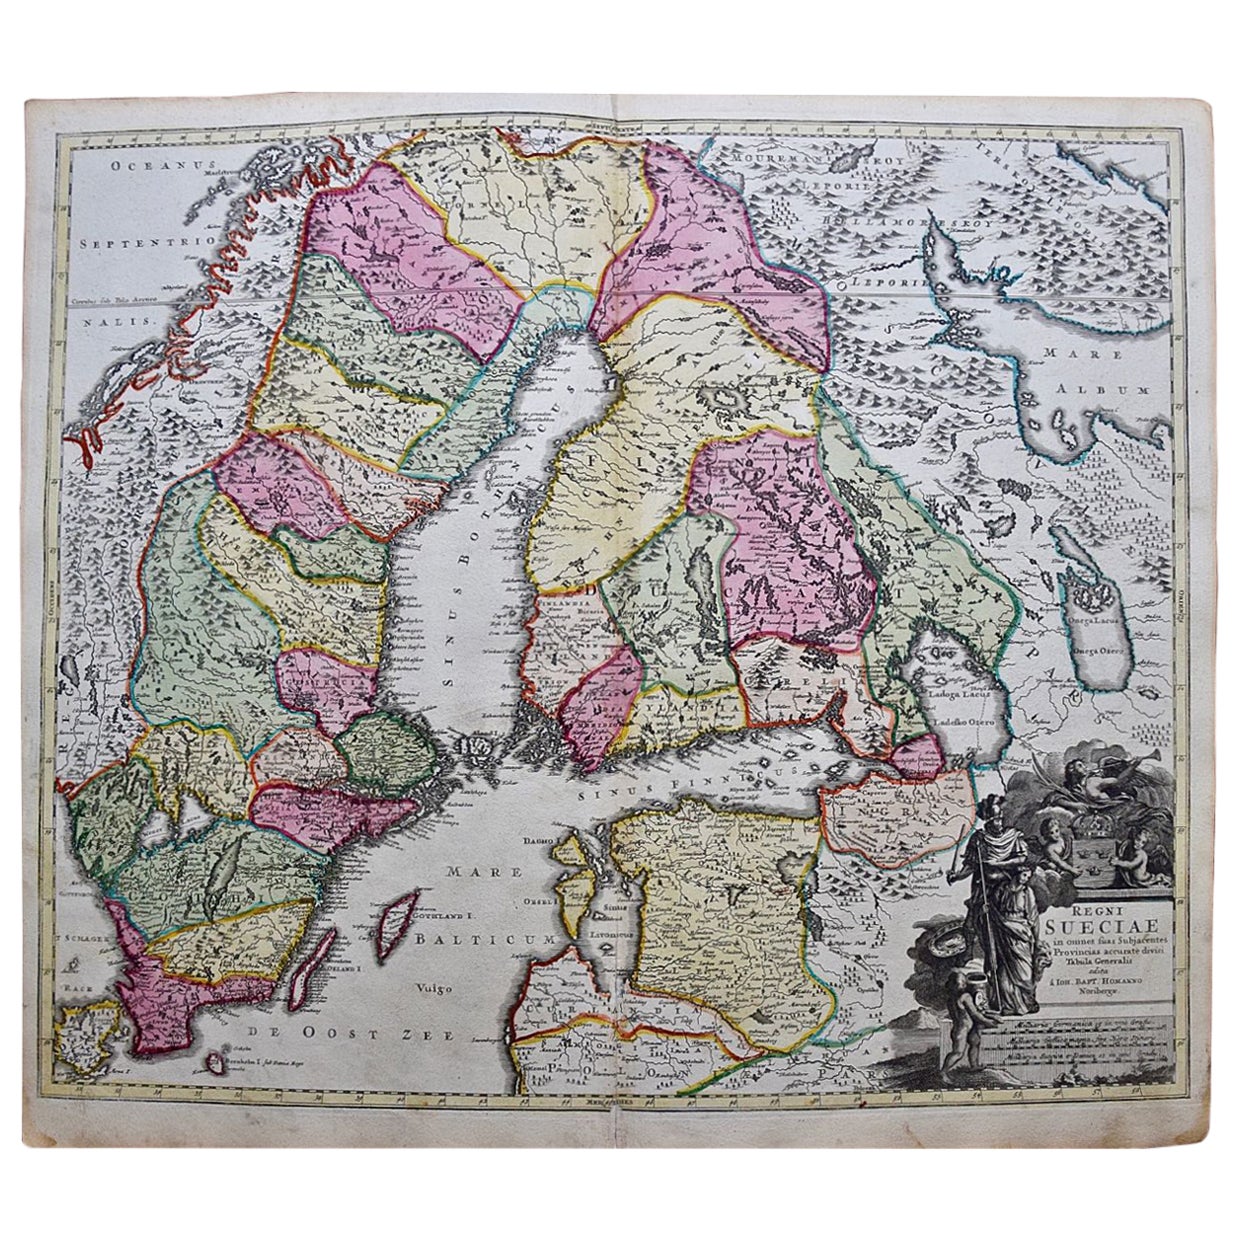 Scandinavia & Portions of Eastern Europe: 18th Century Hand-Colored Homann Map